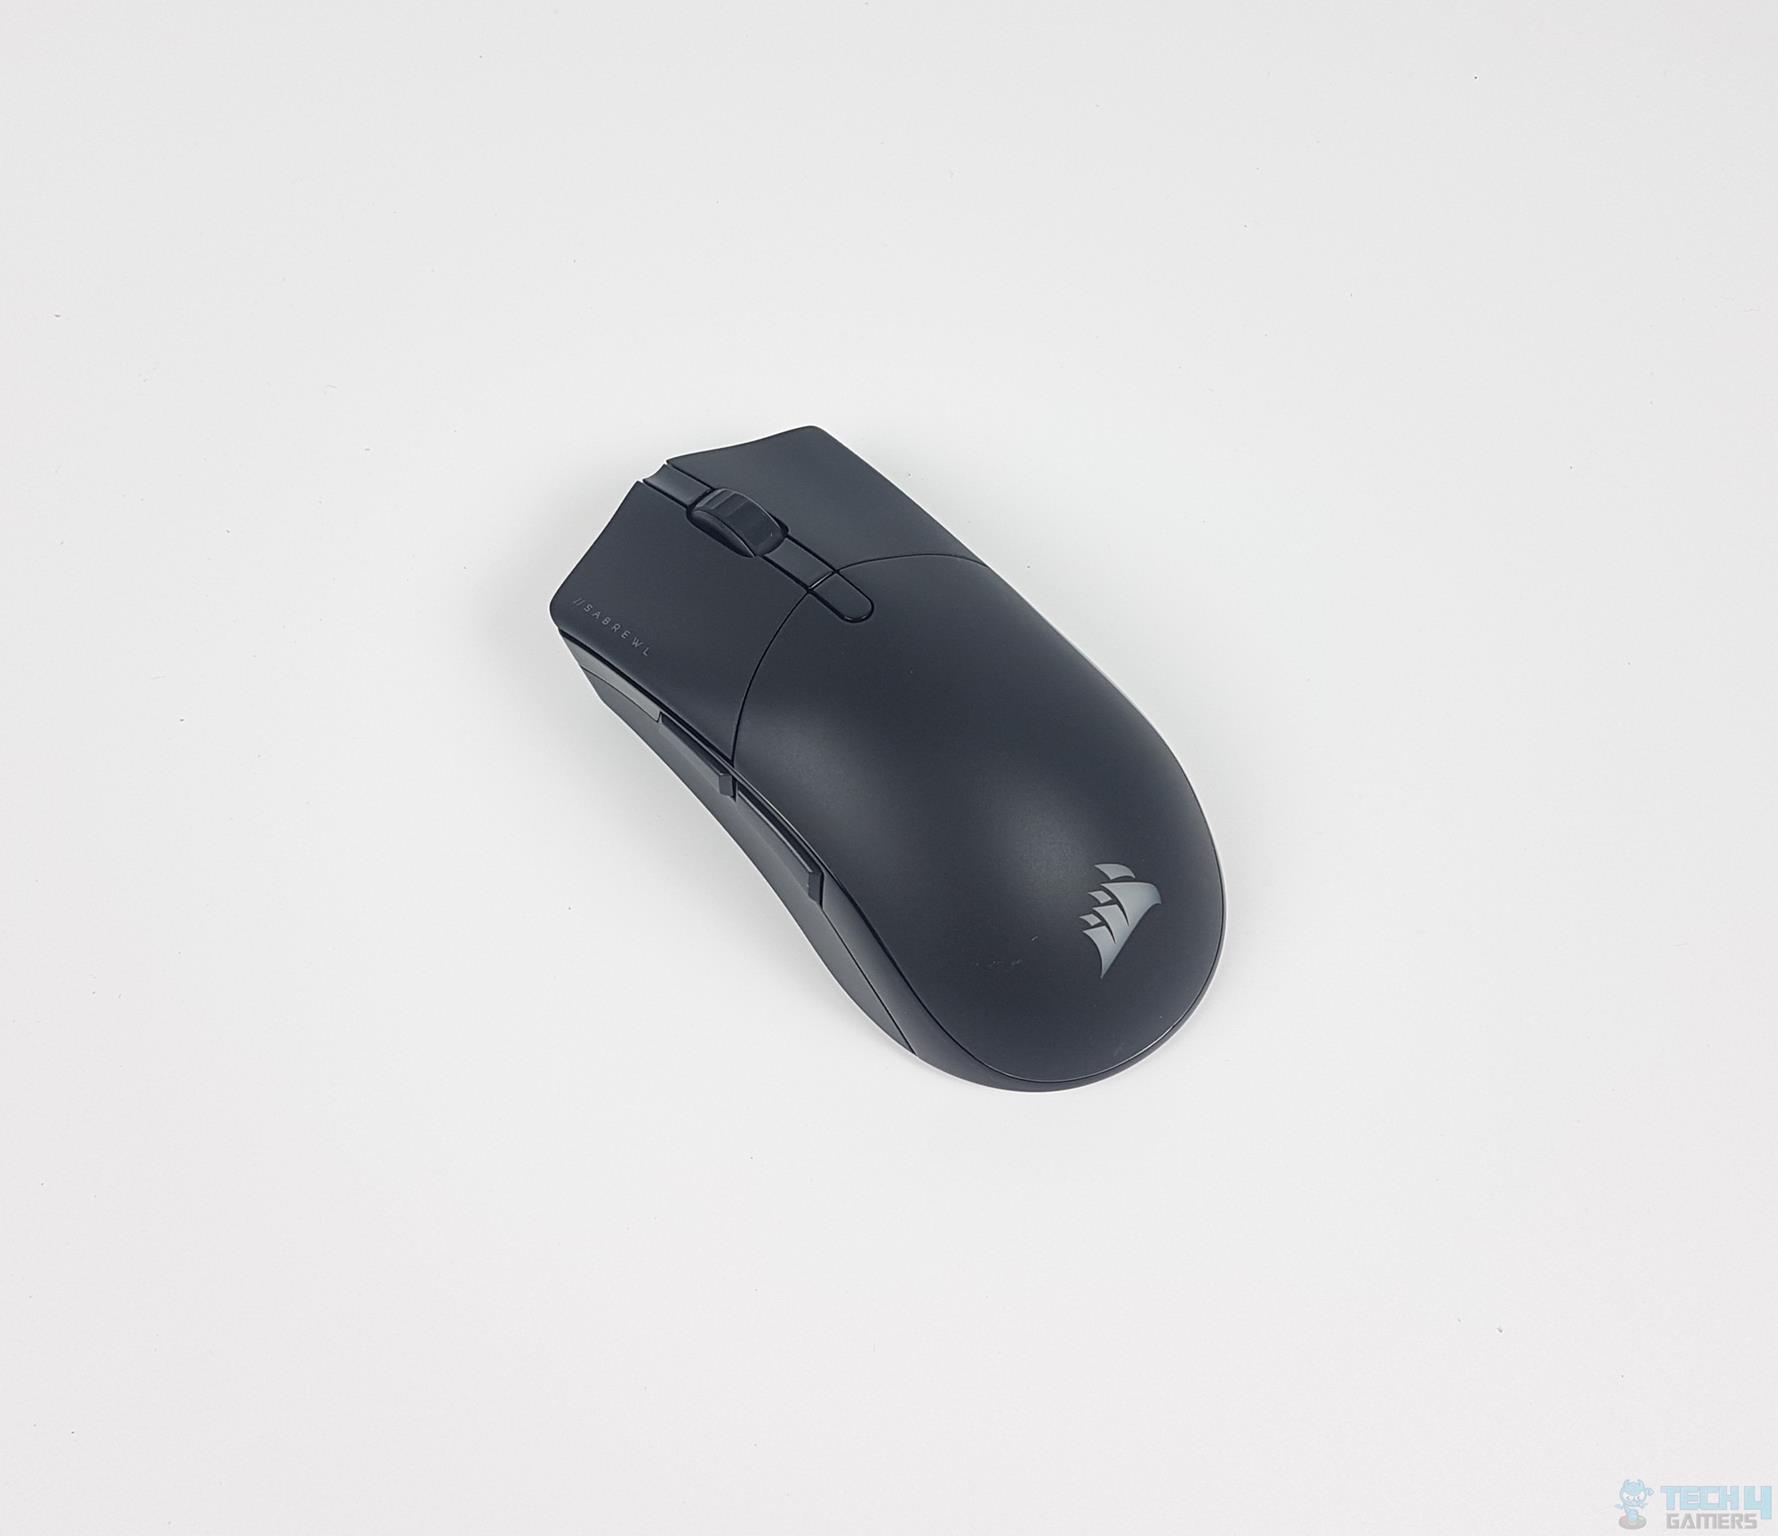 CORSAIR Sabre RGB Pro Wireless Gaming Mouse — The design of the mouse